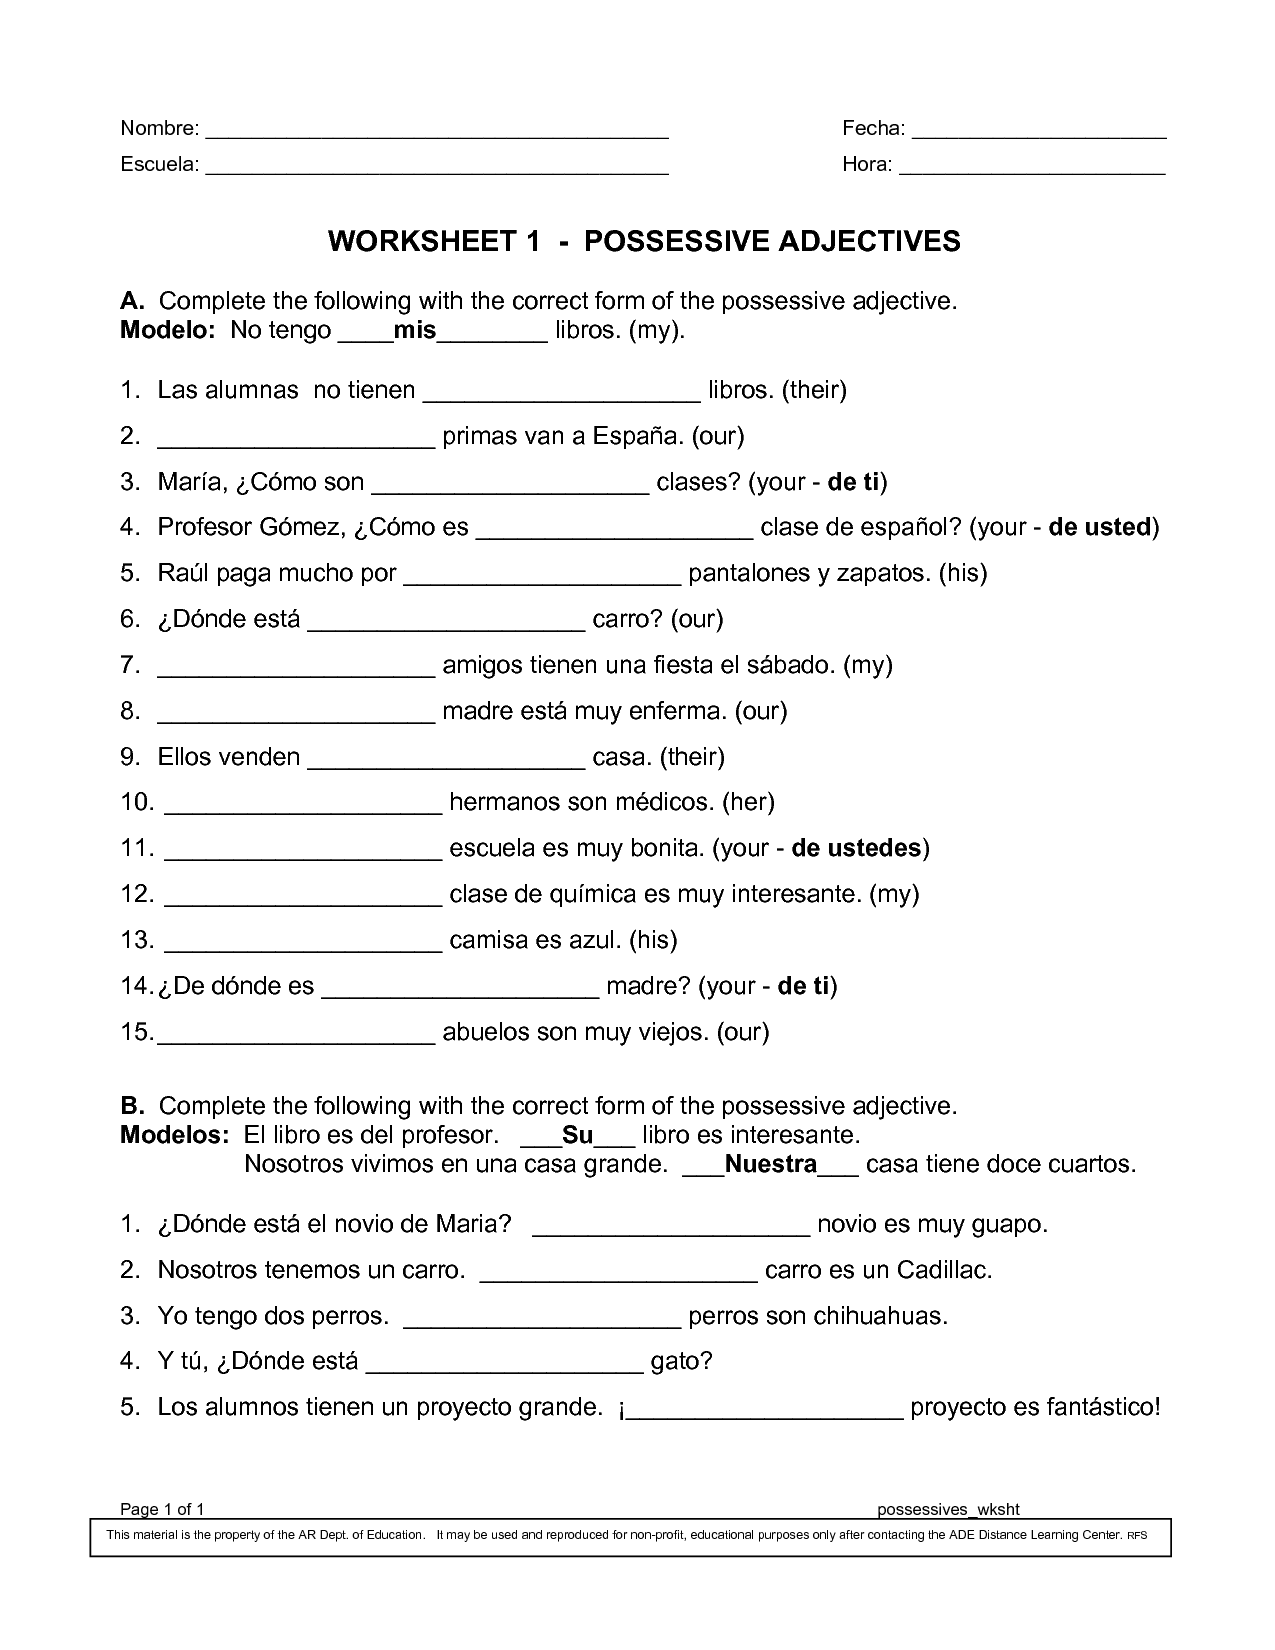 Possessive Adjectives In Spanish Worksheet Answers